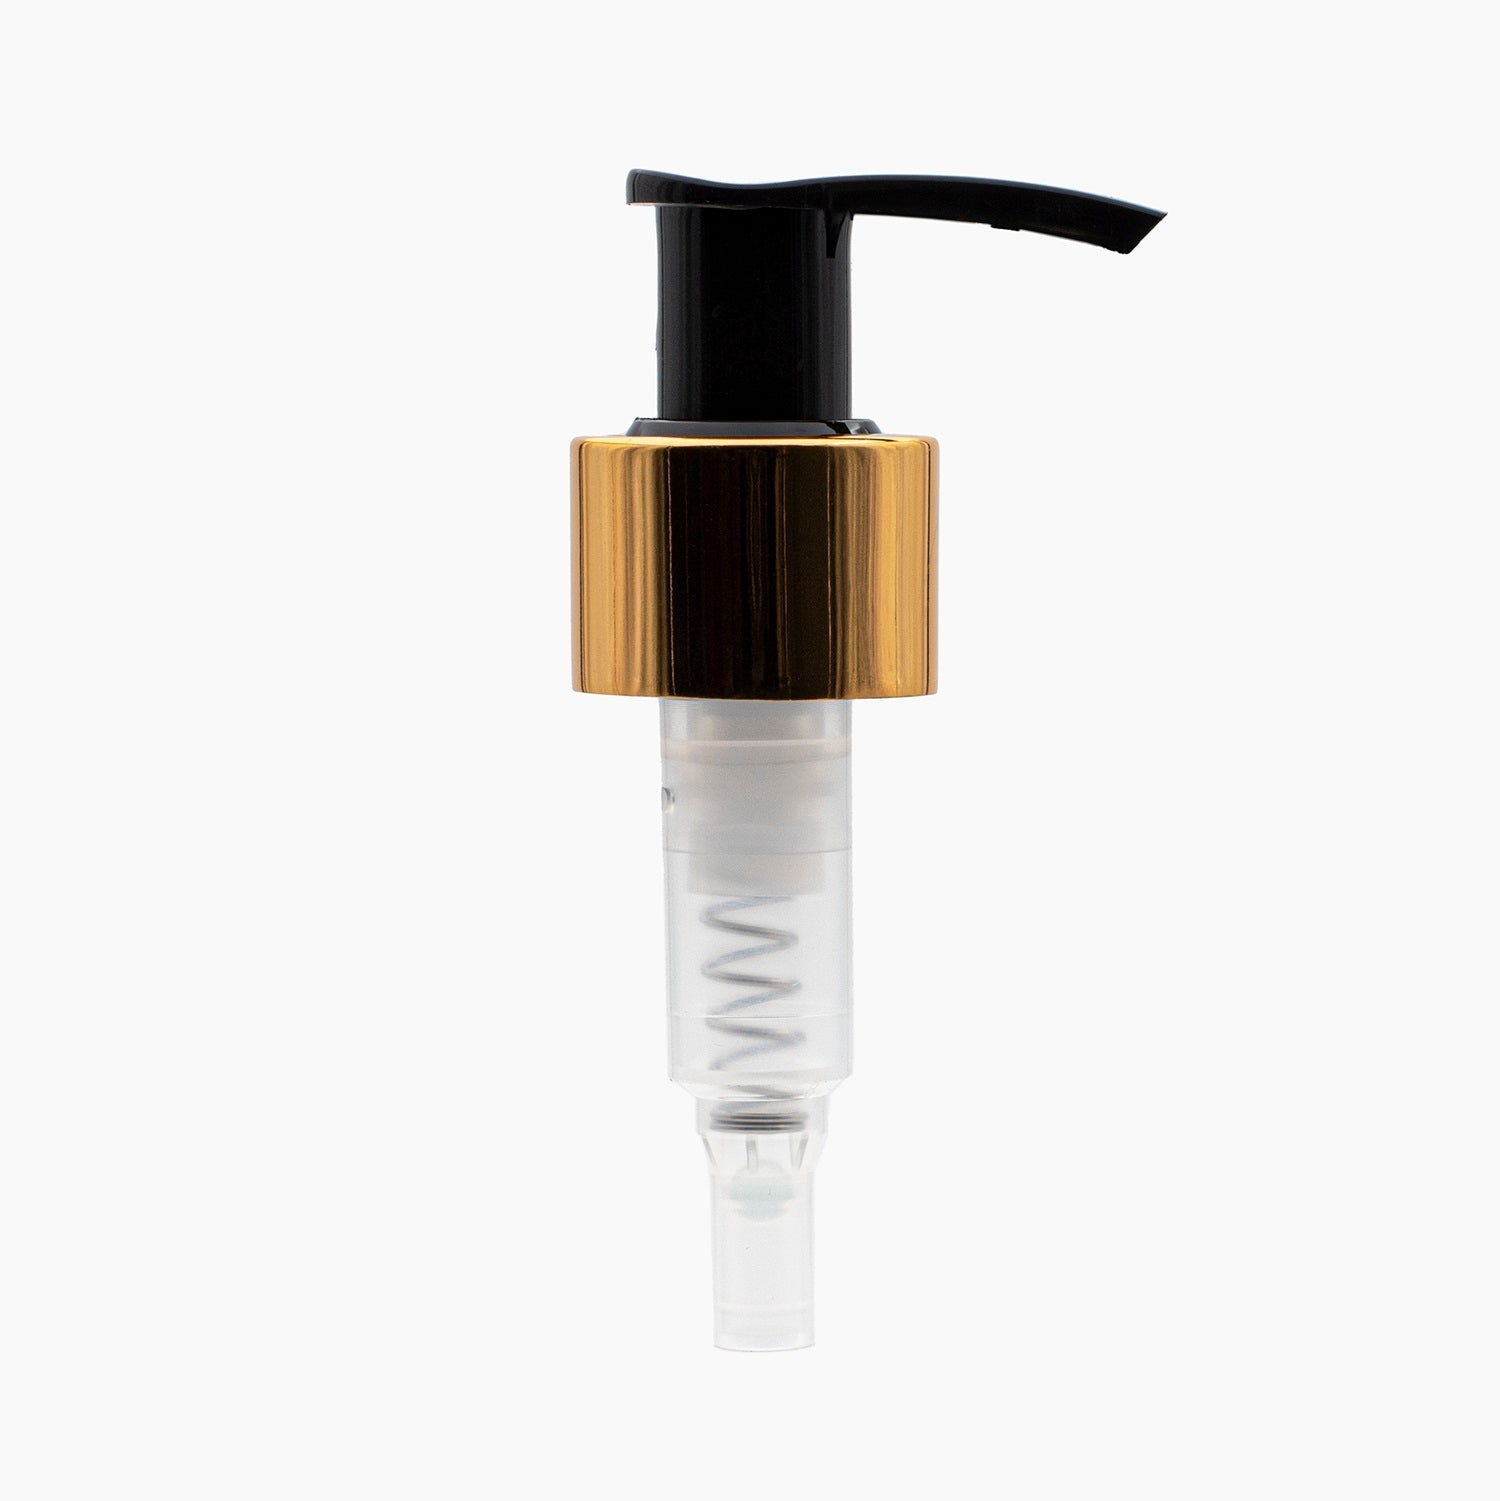 Gold Collar Black 24mm Plastic Lotion Pump Cap On White Background | Brightpack Closures And Accessories